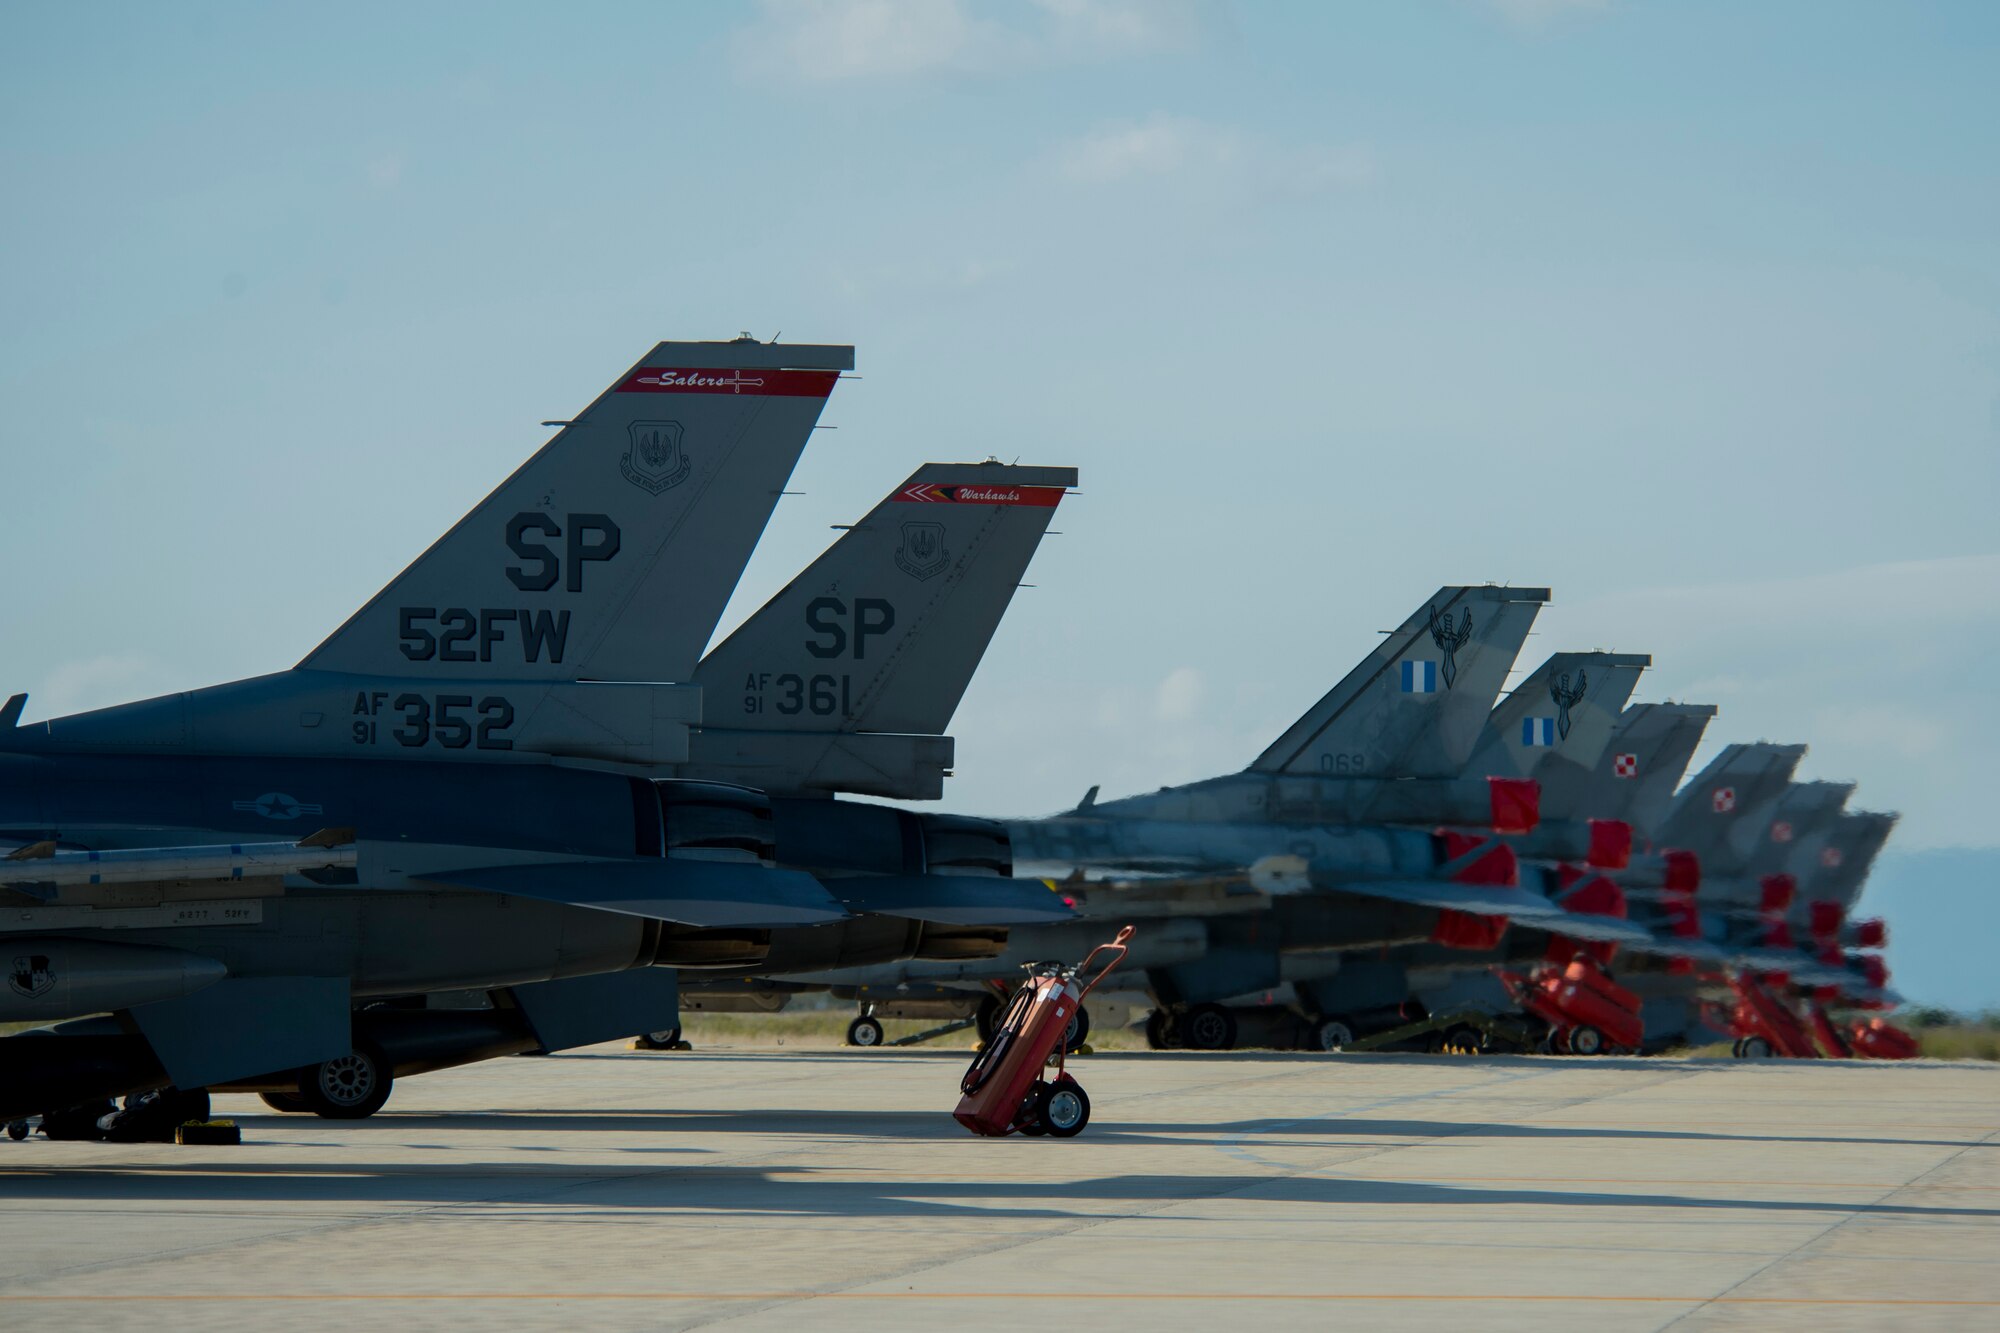 Two F-16 Fighting Falcon fighter aircraft, assigned to 480th Fighter Squadron, Spangdahlem Air Base, Germany, park next to F-16s from the Hellenic air force and Polish air force after the Trapani Air Show at Trapani Air Base, Italy, Oct. 19, 2015. The Trapani Air Show kicked off Trident Juncture 2015, a training exercise involving more than 30 Allied and Partner Nations taking place throughout Italy, Portugal, Spain, the Atlantic Ocean, the Mediterranean Sea, Canada, Norway, Germany, Belgium and the Netherlands. (U.S. Air Force photo by Airman 1st Class Luke Kitterman/Released)
